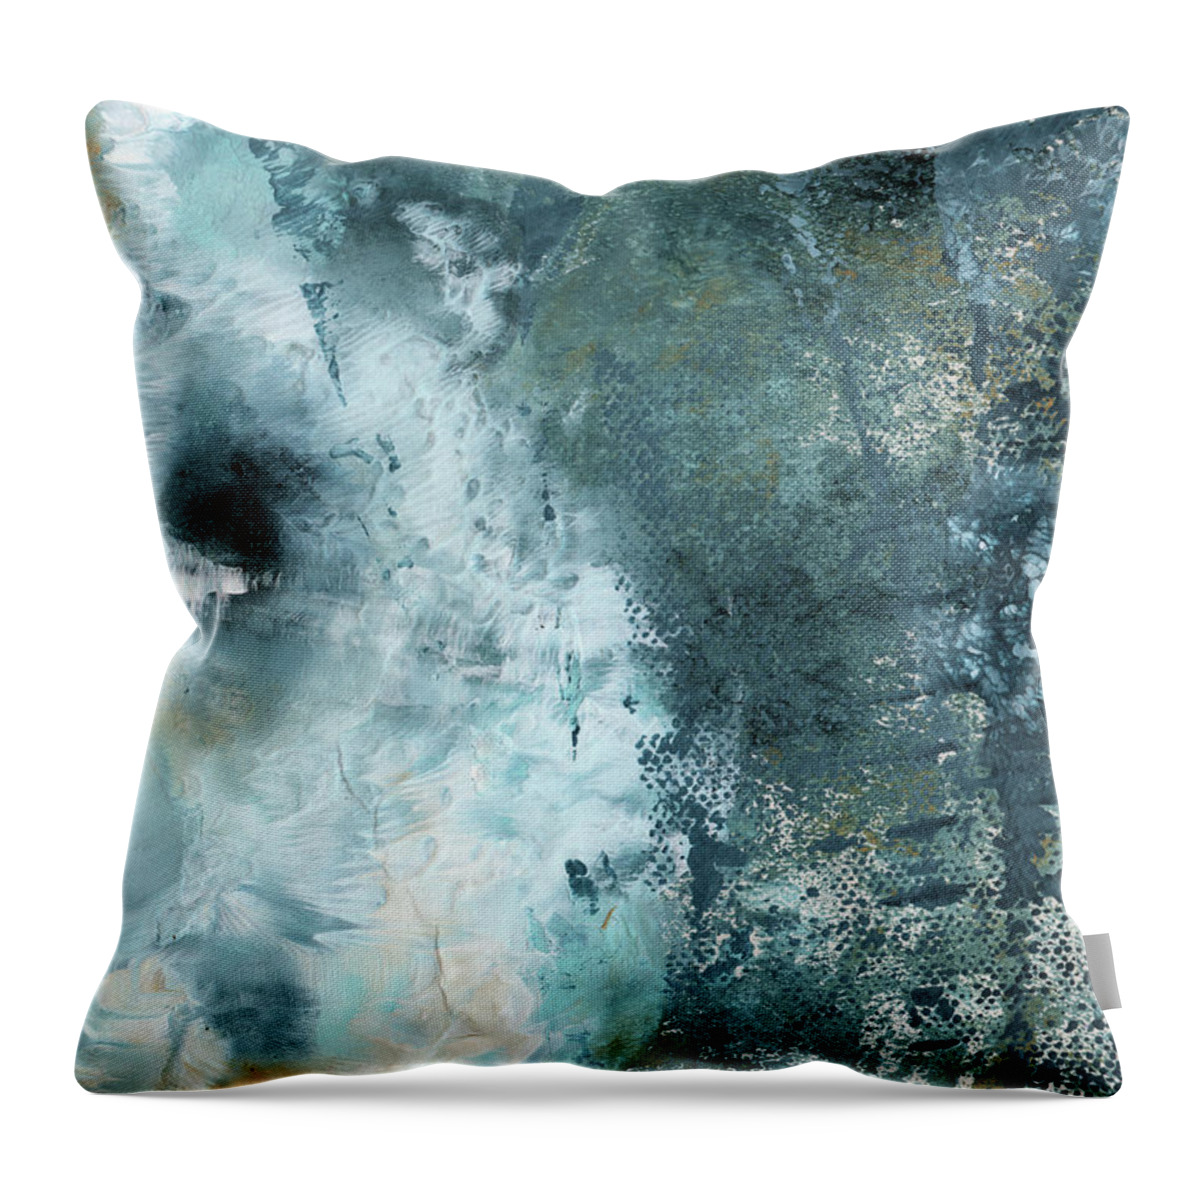 Abstract Throw Pillow featuring the painting Summer Storm- Abstract Art by Linda Woods by Linda Woods